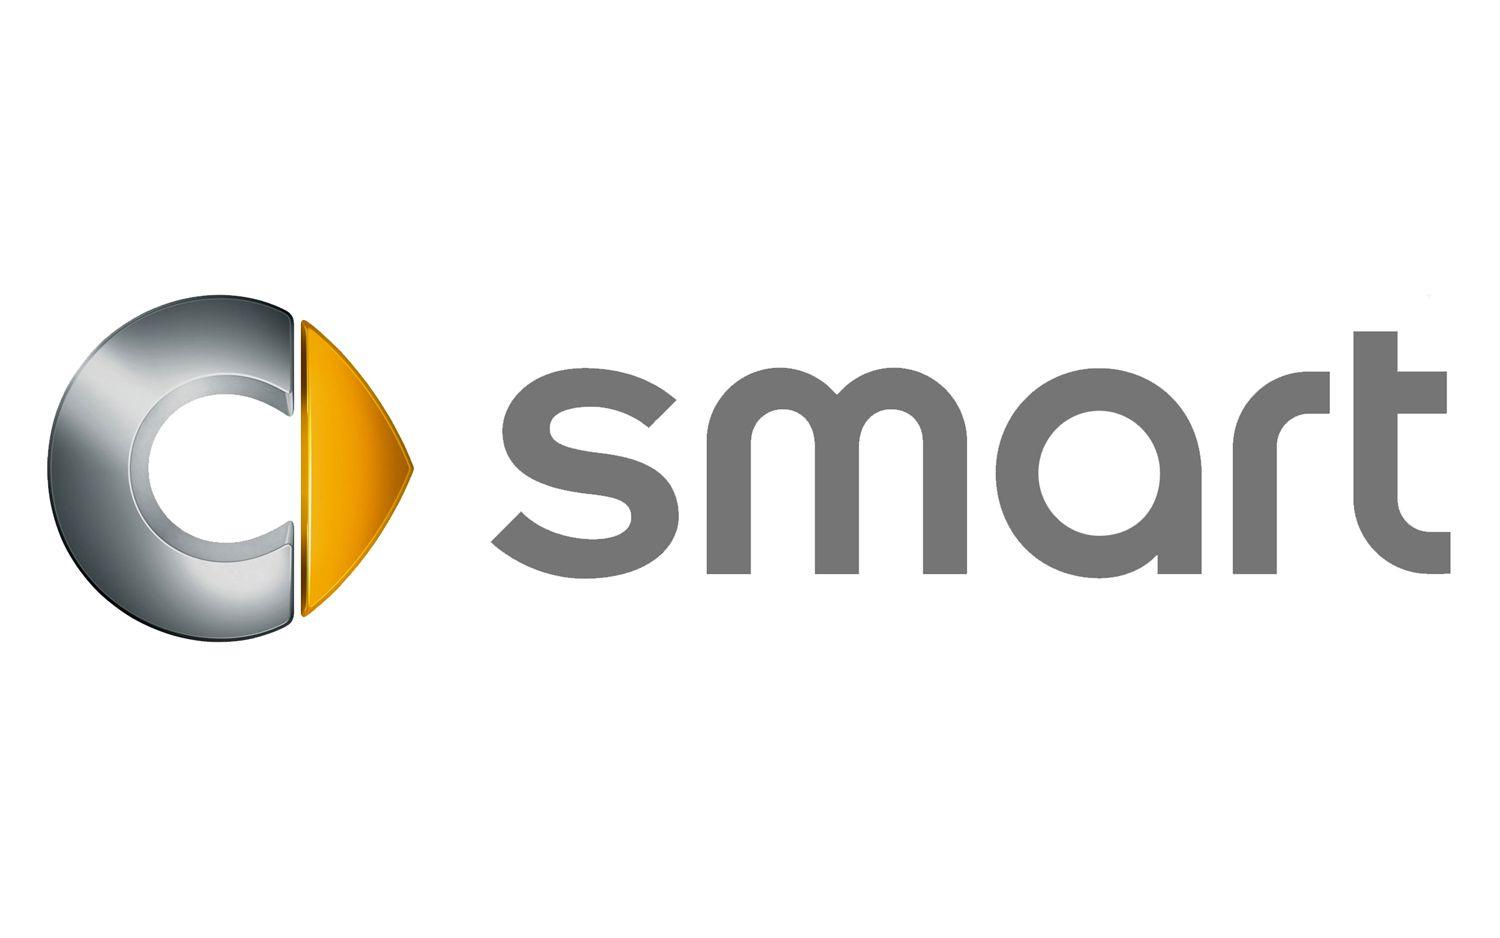 Yellow and Silver Car Logo - smart Logo, smart Car Symbol Meaning And History | Car Brand Names.com